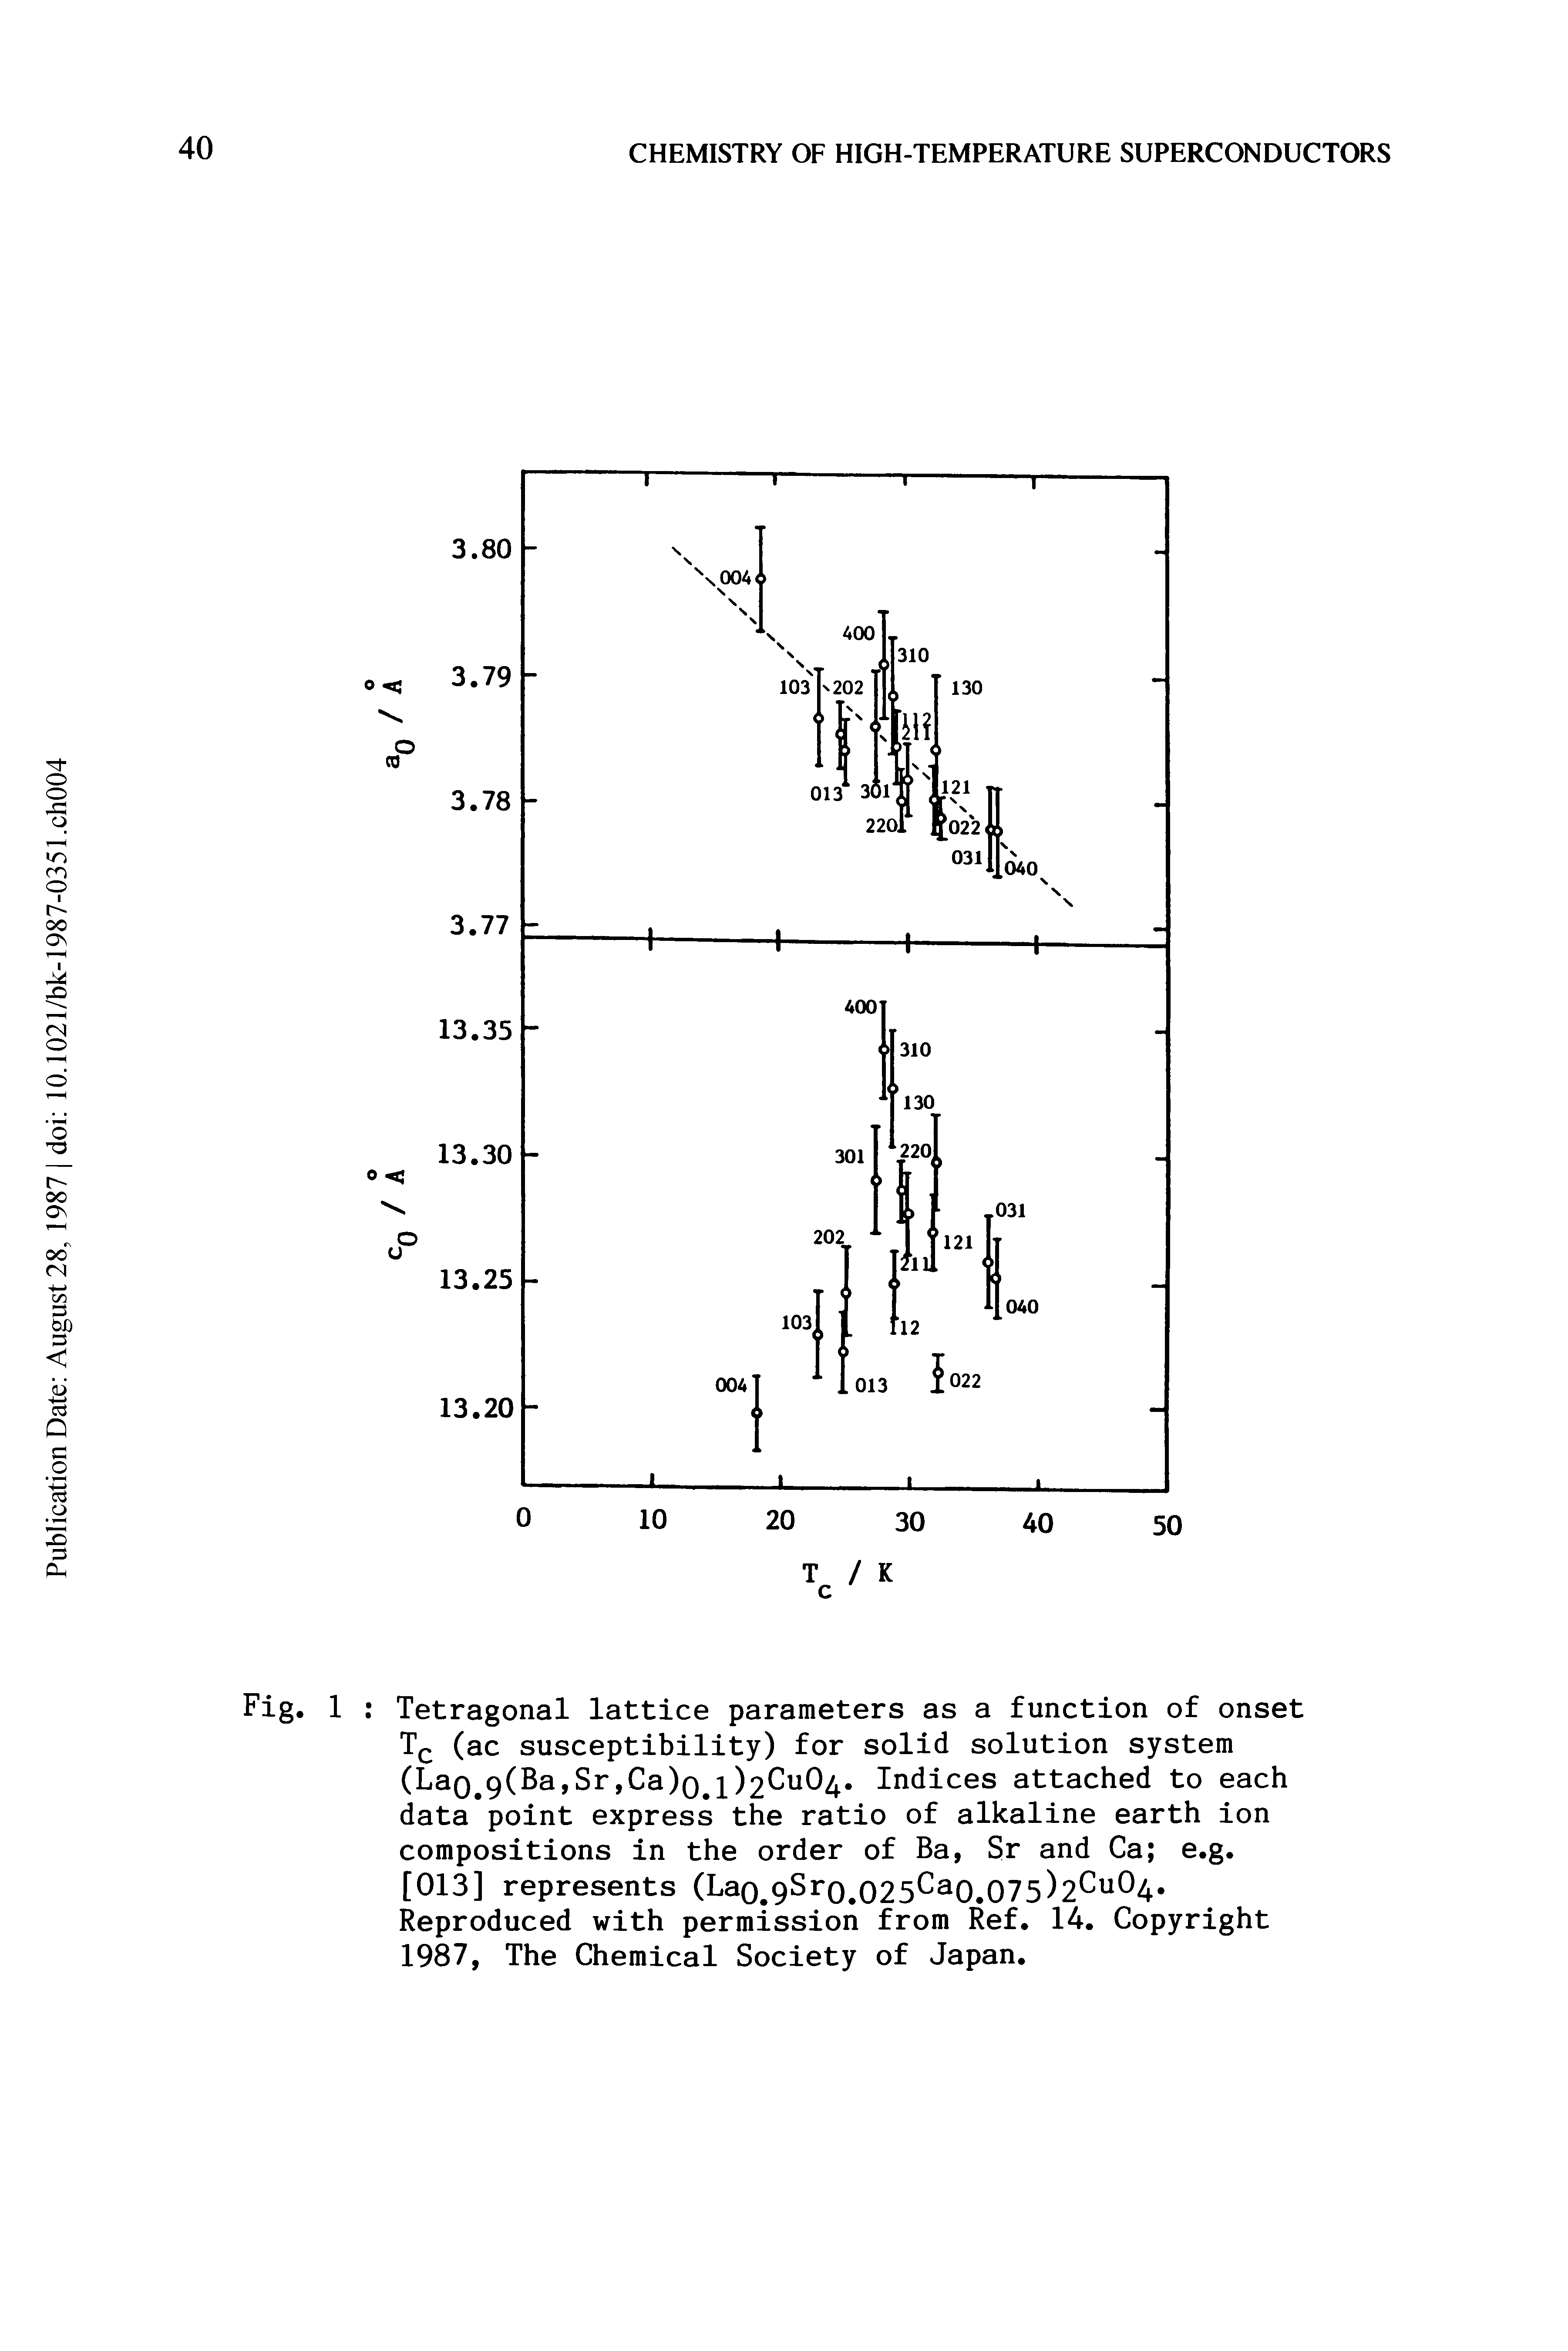 Fig. 1 Tetragonal lattice parameters as a function of onset Tc (ac susceptibility) for solid solution system (Lao.9(Ba,Sr,Ca)o.i)2Cu04 Indices attached to each data point express the ratio of alkaline earth ion compositions in the order of Ba, Sr and Ca e.g. [013] represents (Lao.9Sro.025Ca0.075)2Cu04 Reproduced with permission from Ref. 14. Copyright 1987, The Chemical Society of Japan.